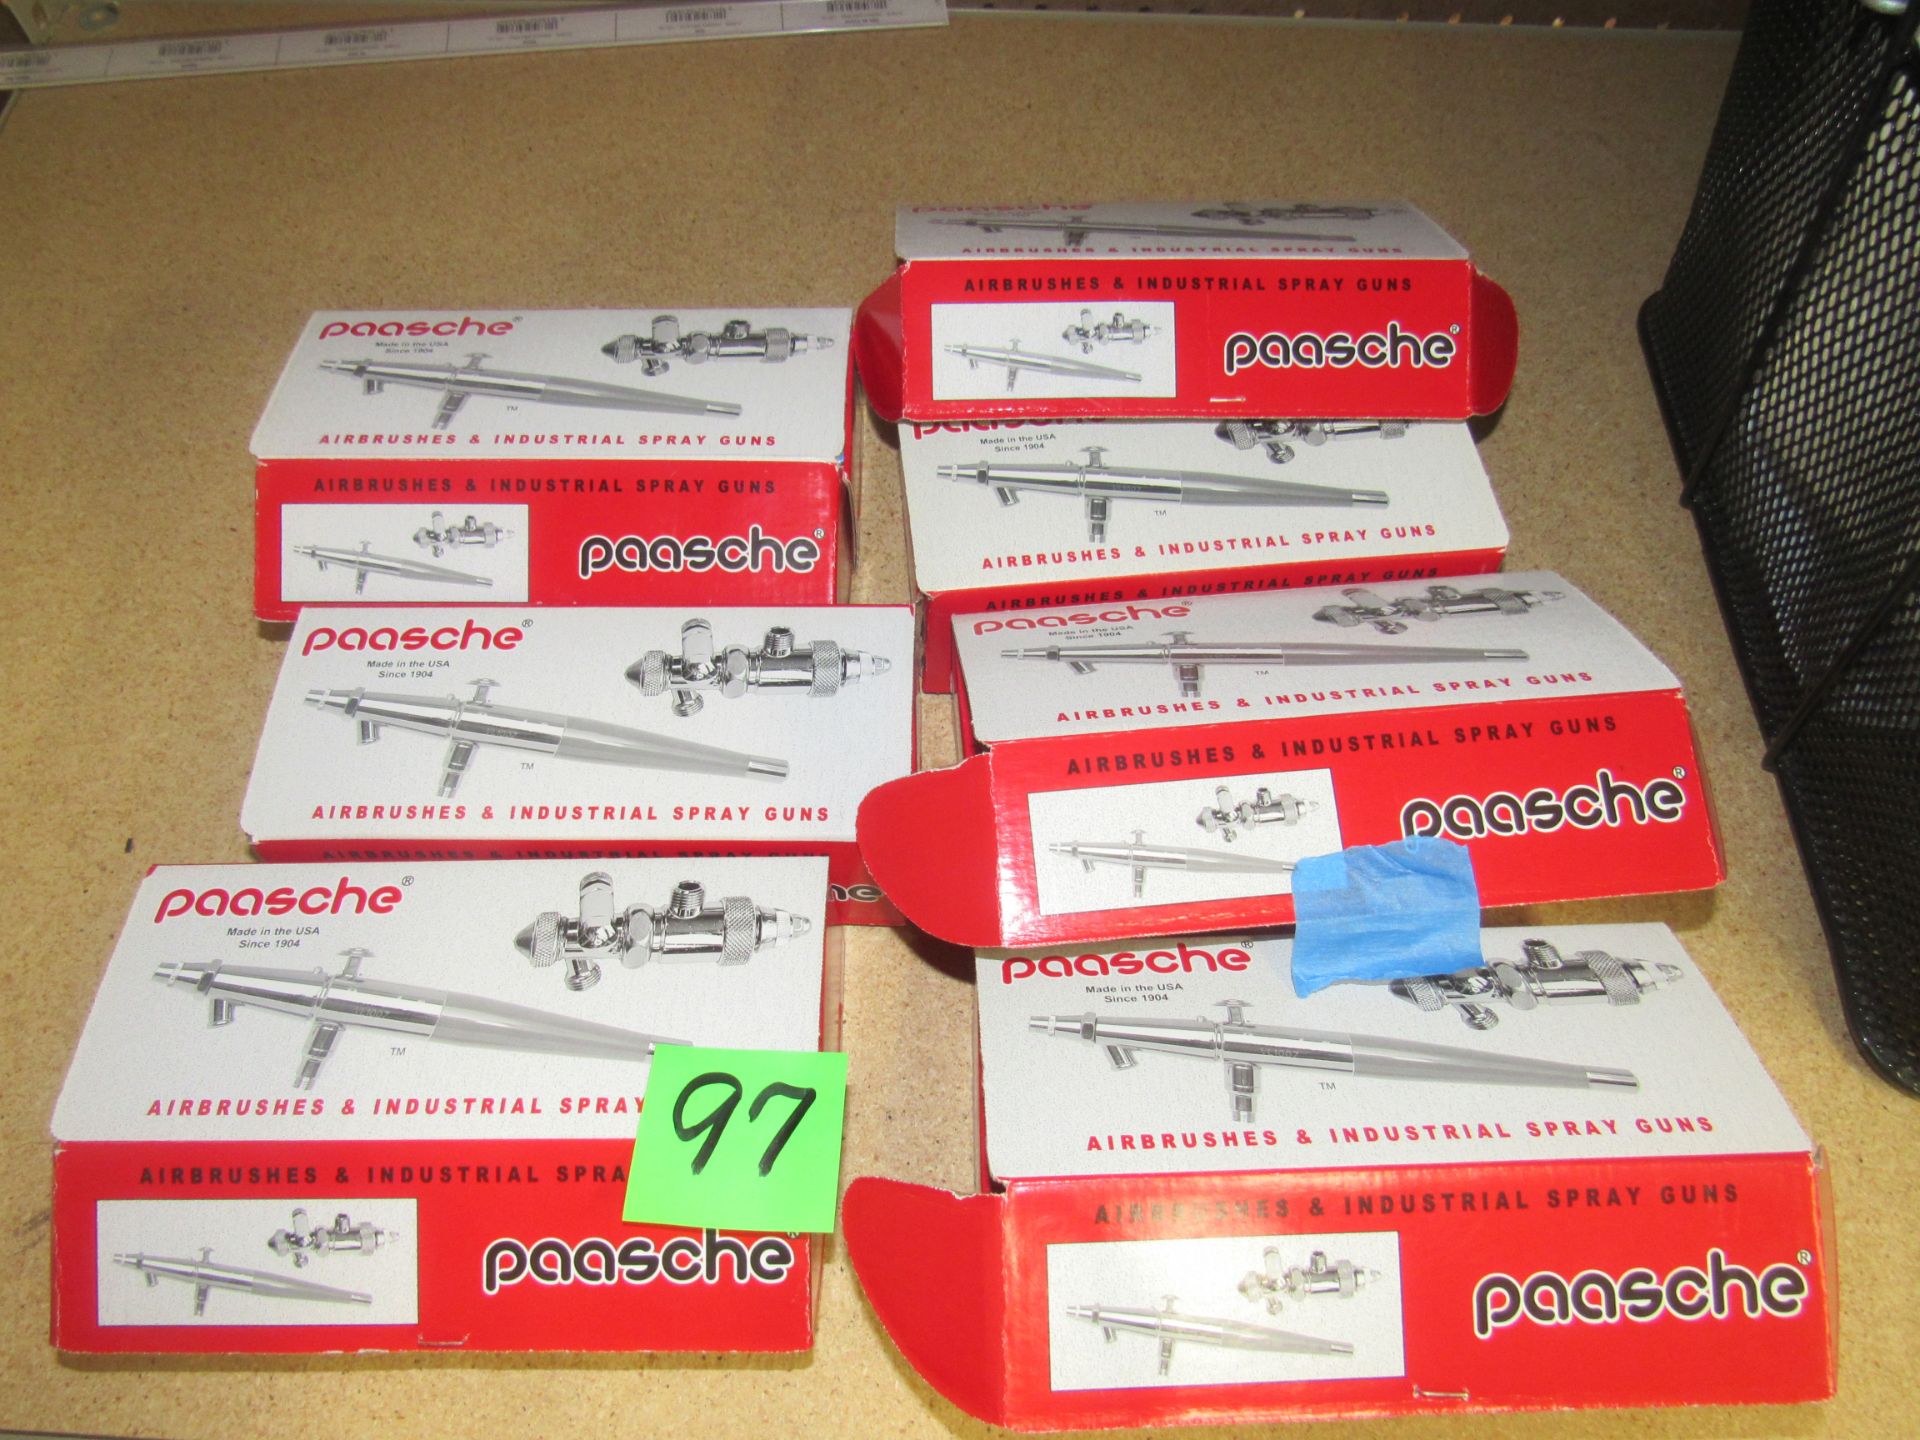 7 Paasche airbrushes